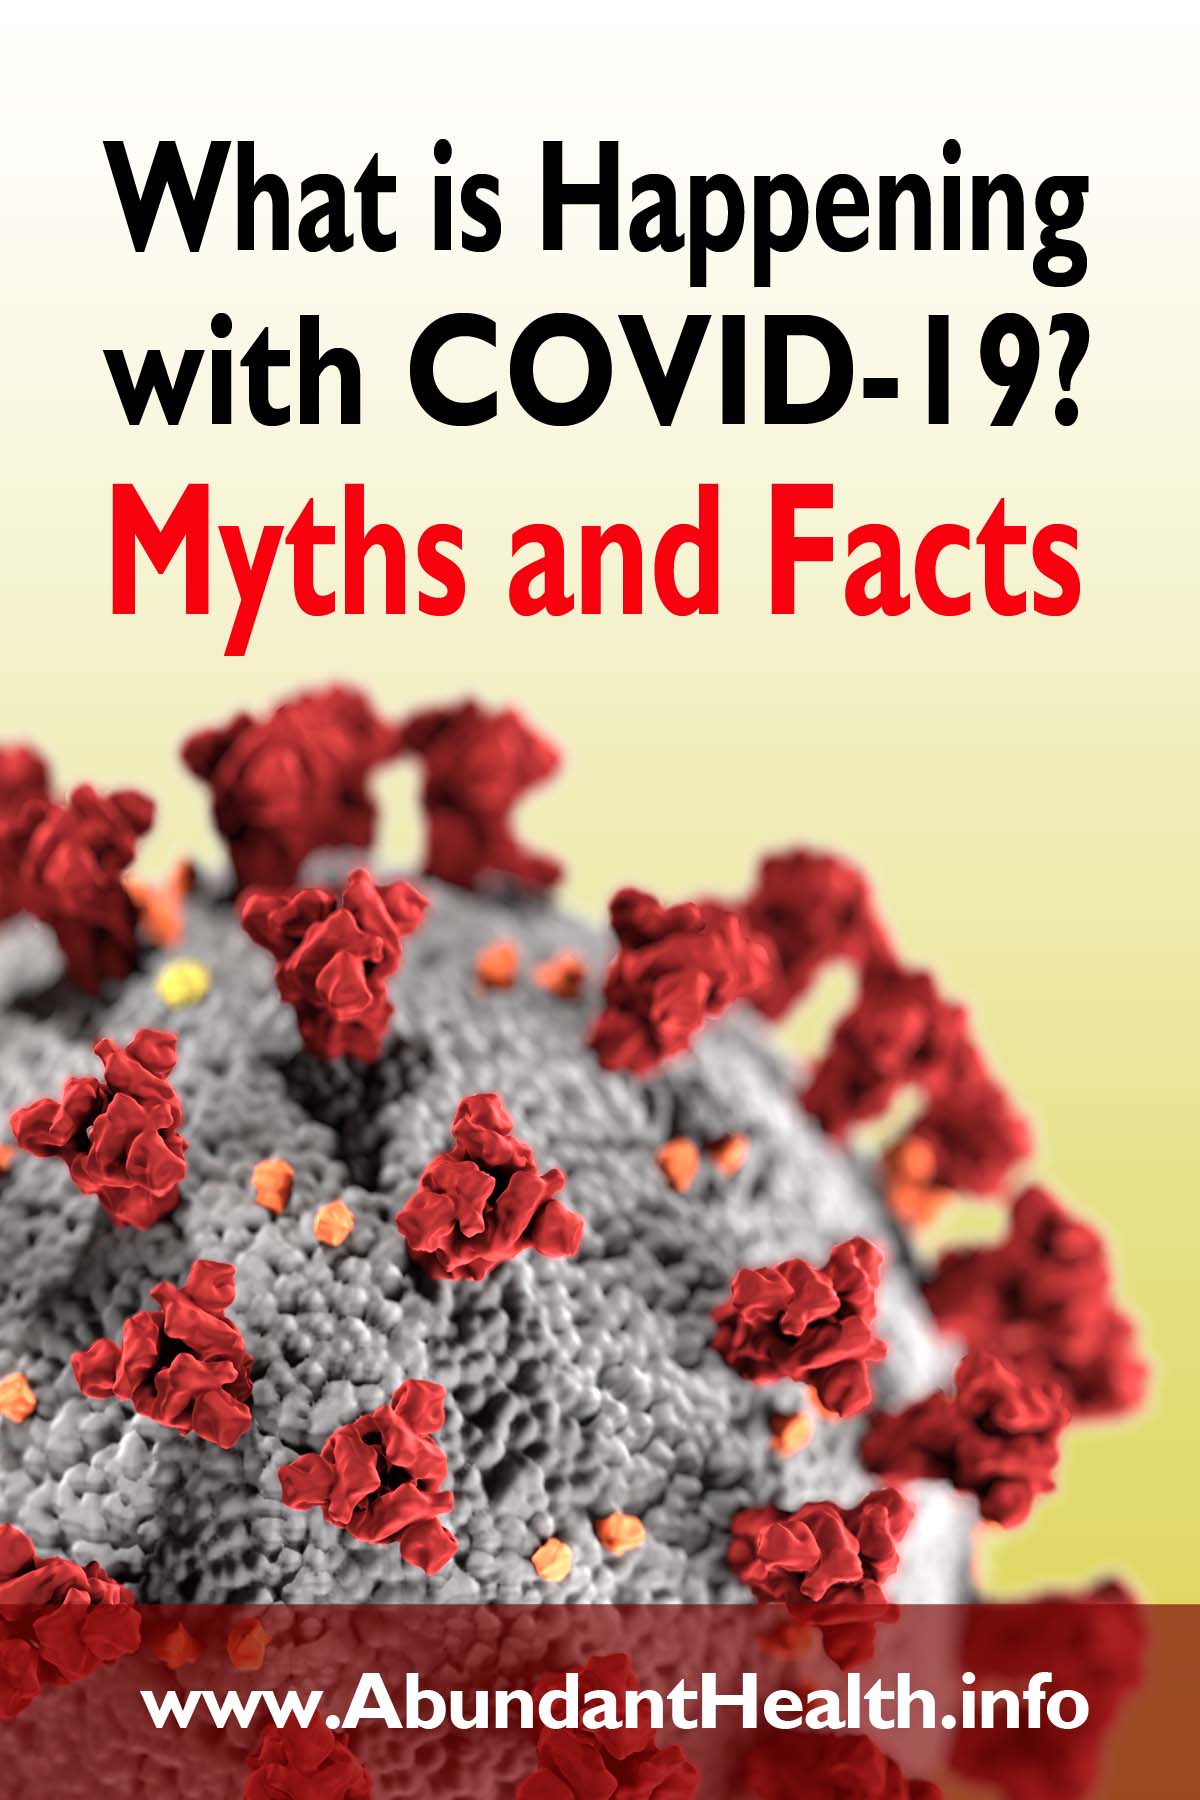 What is Happening with COVID-19? Myths and Facts